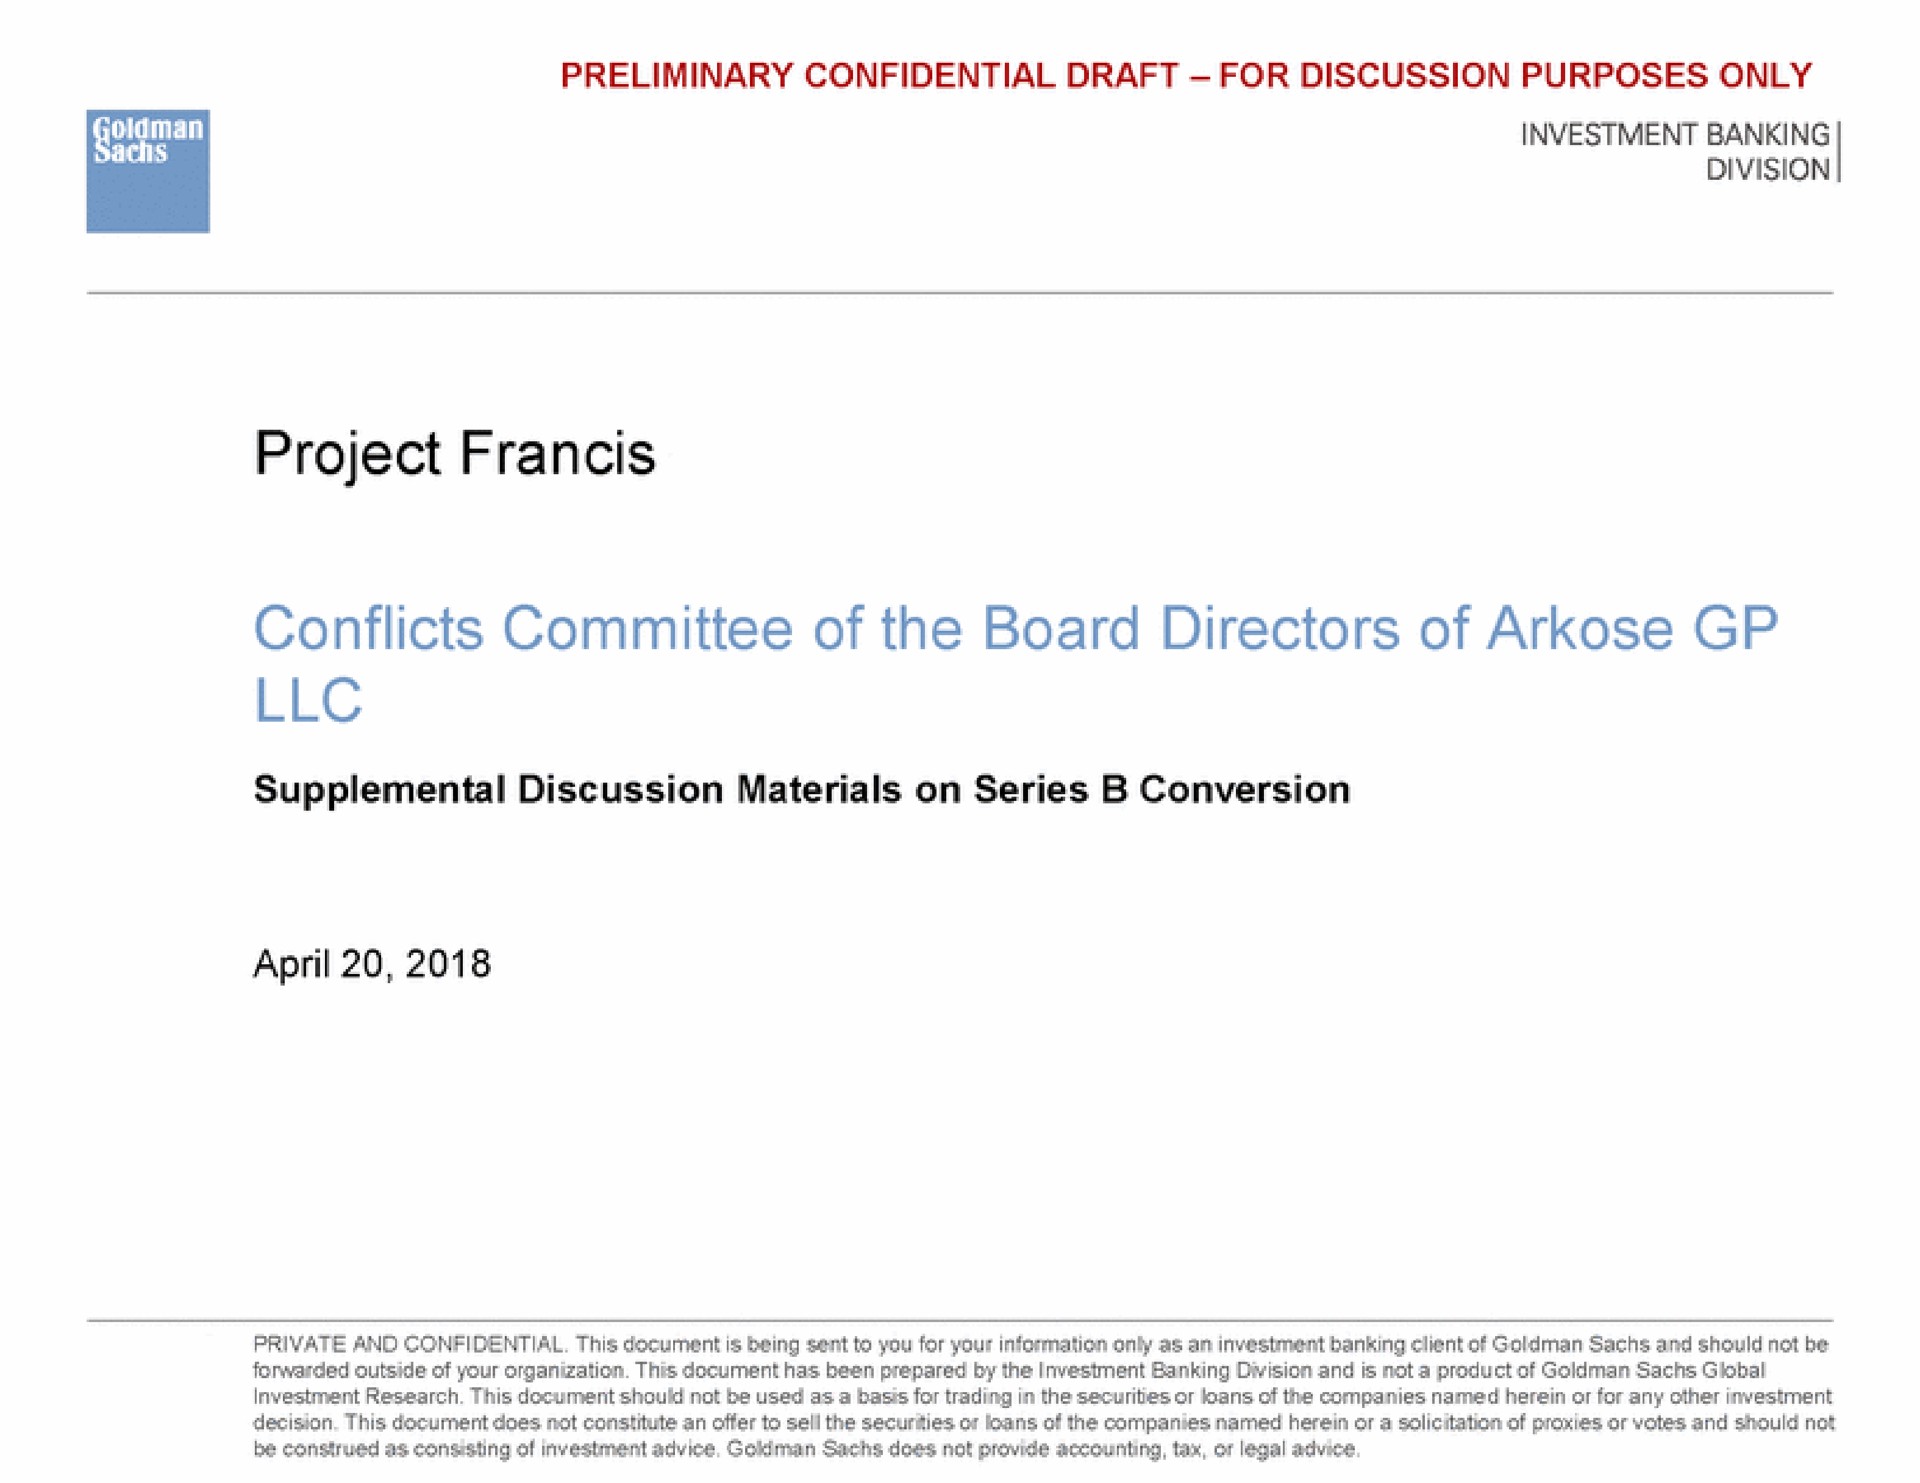 investment banking division project conflicts committee of the board directors of arkose | Goldman Sachs